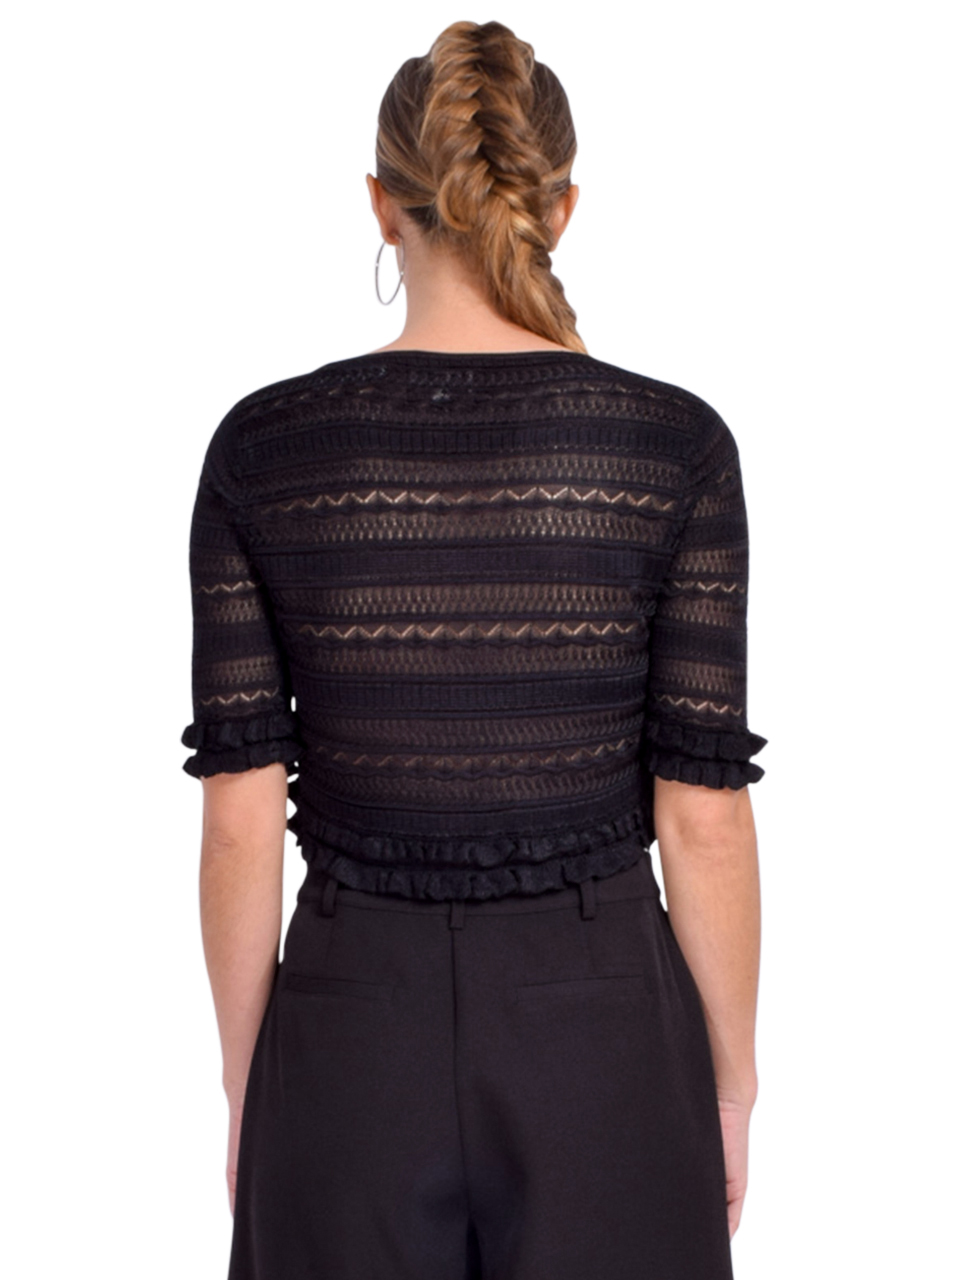 Cinq a Sept Imaan Ruffled Knit Top in Black Back View 